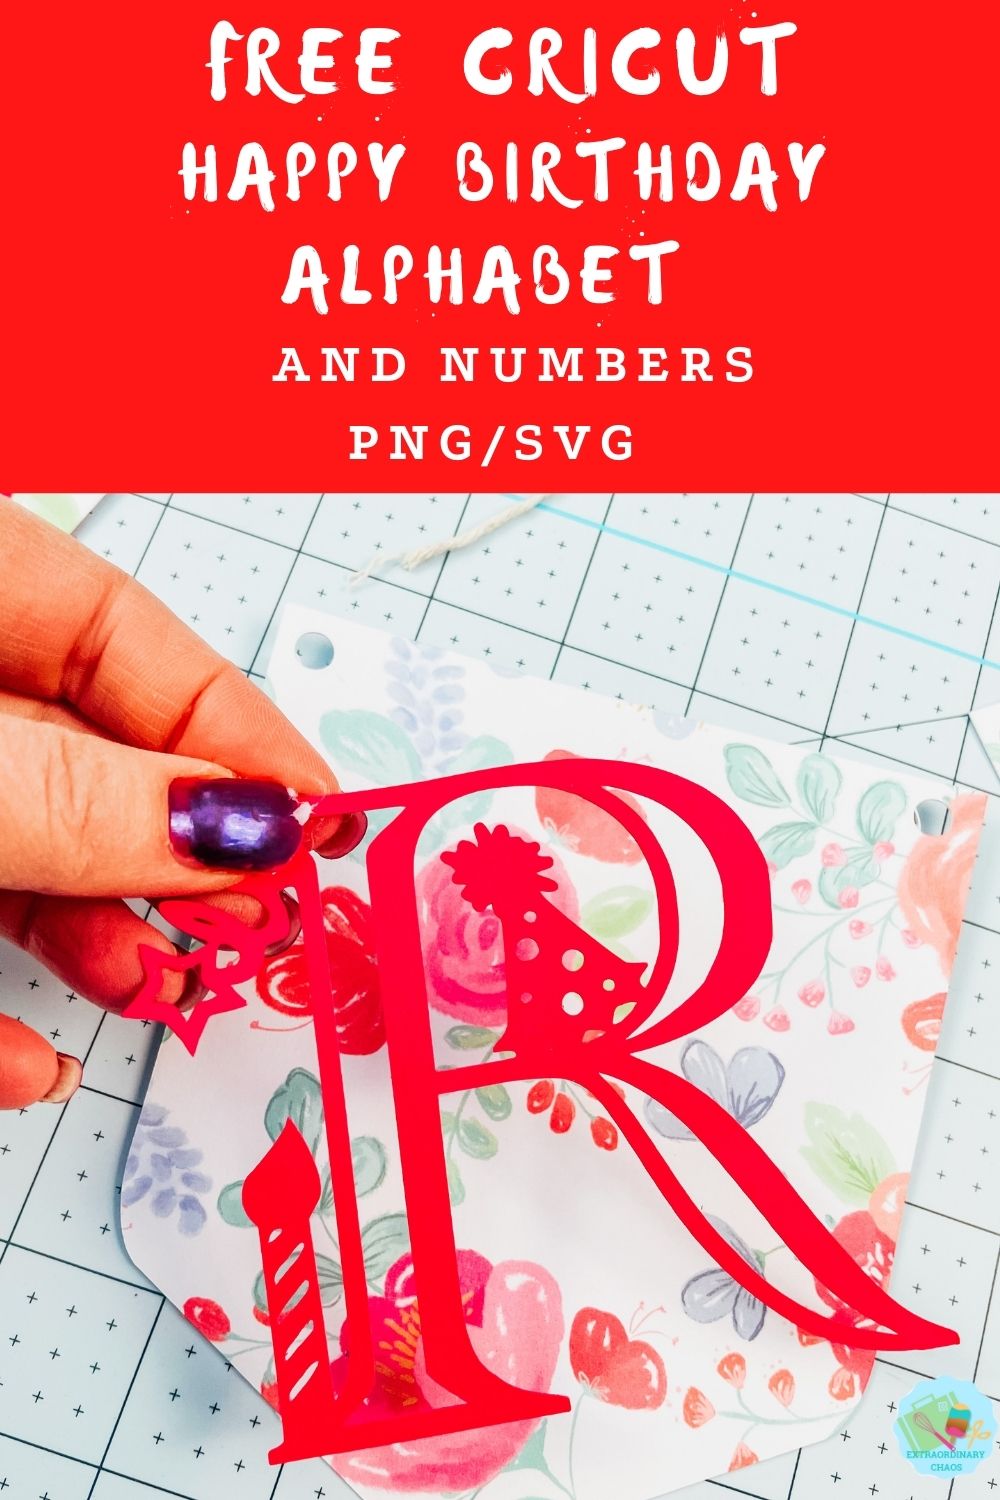 Free downloadable Happy Birthday Alphabet and number template for parties, banners, card making and invitations